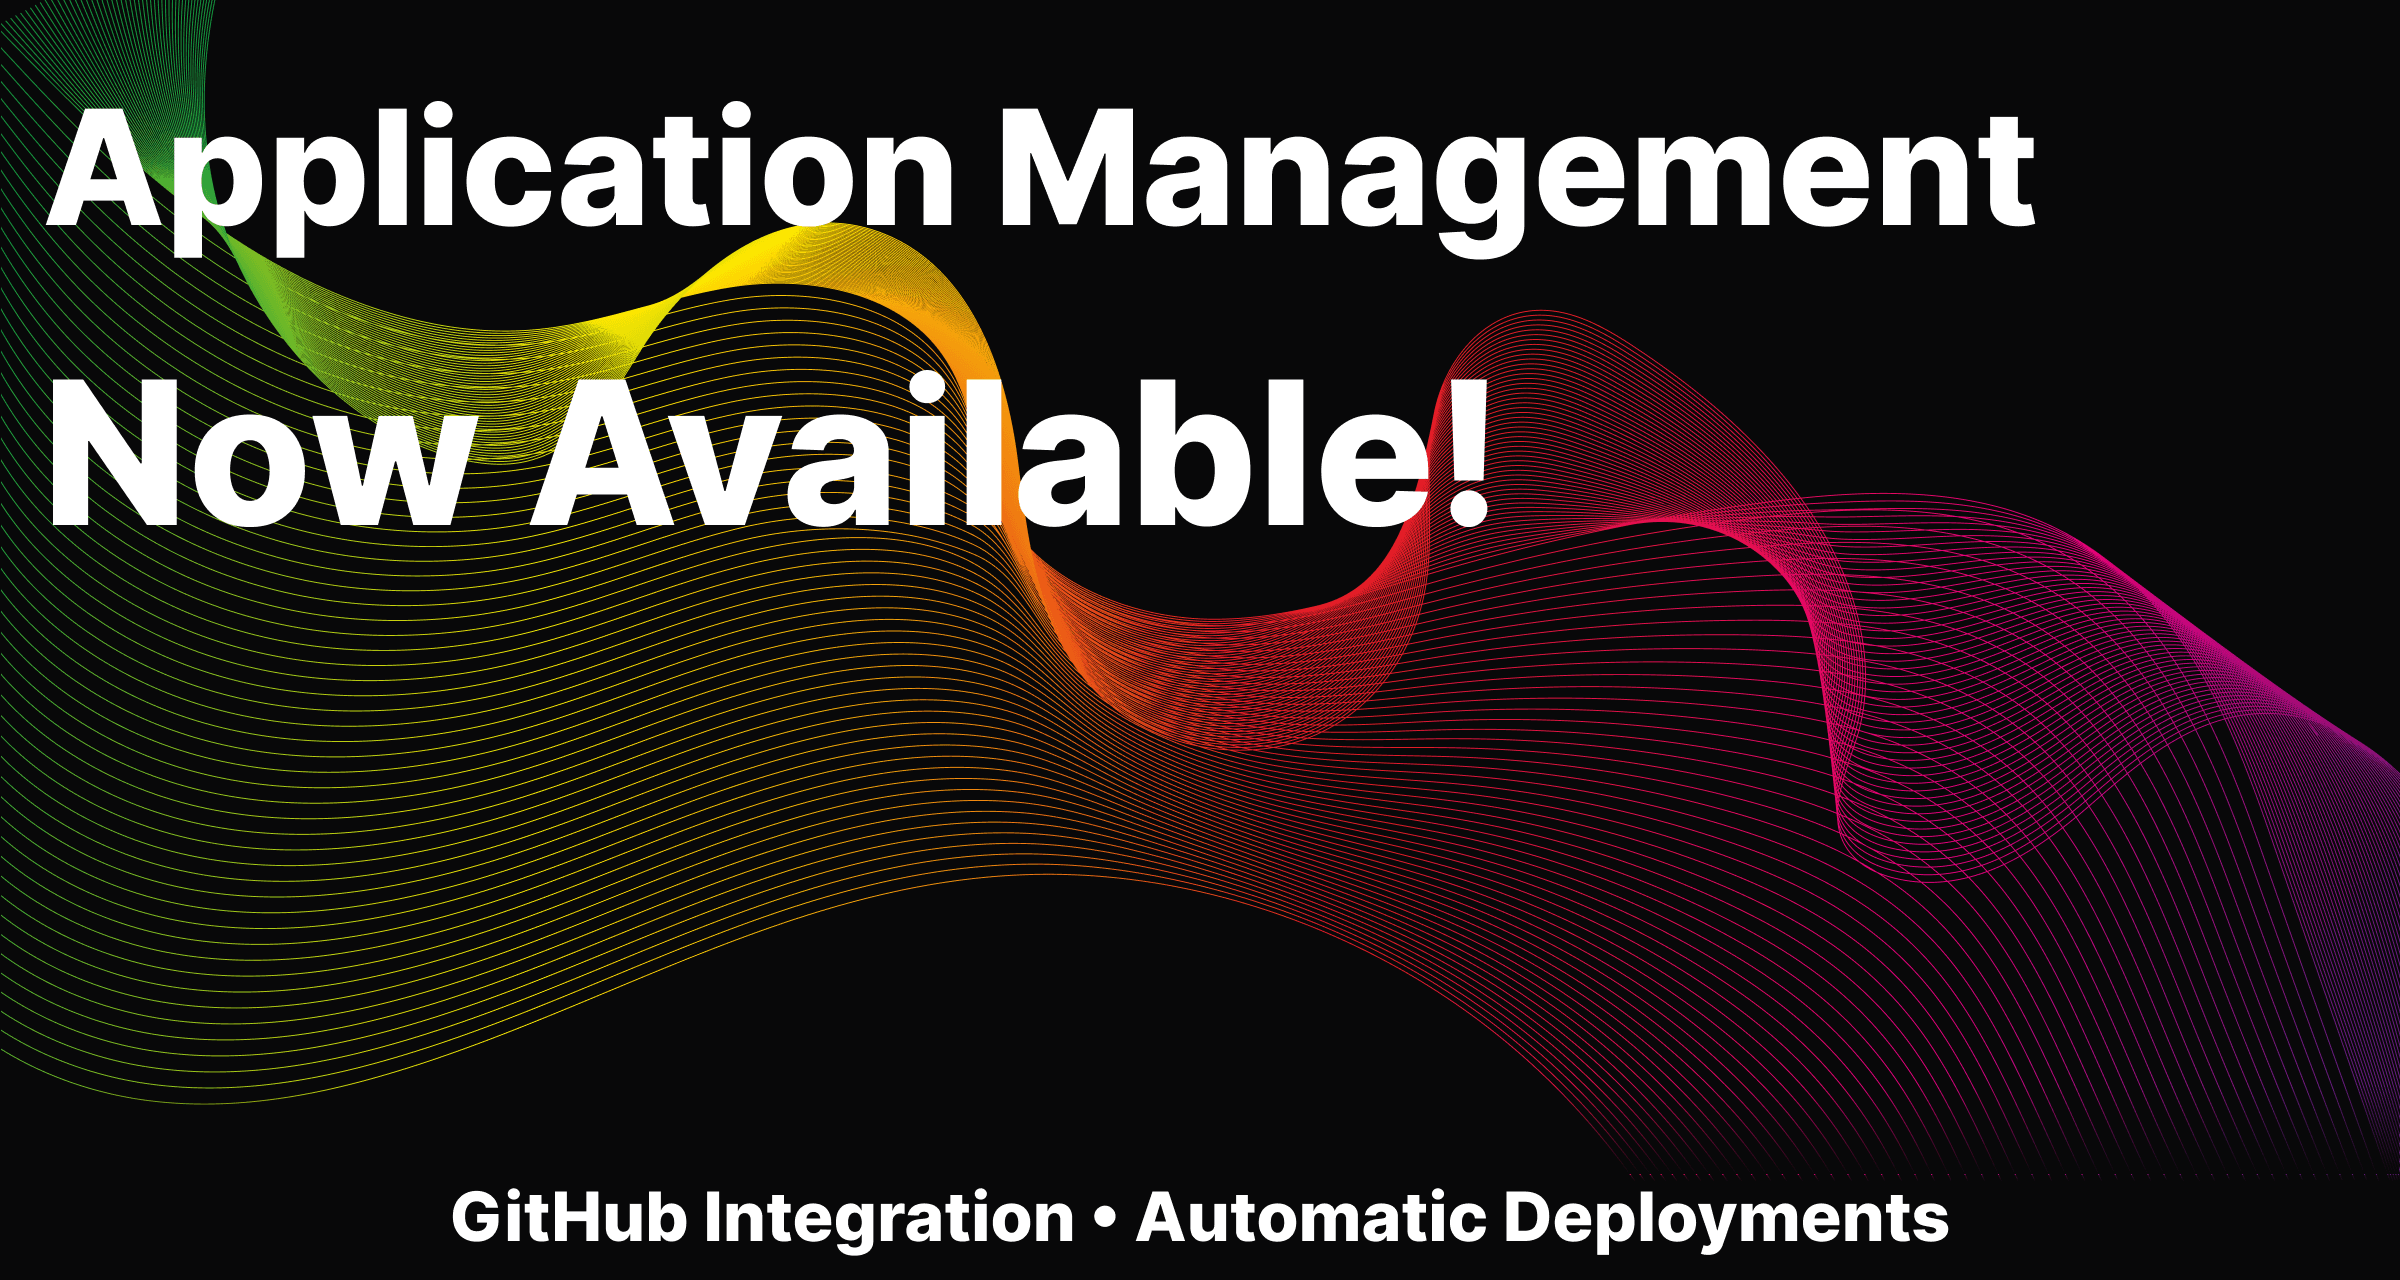 Application Management & Deployments - Now Available